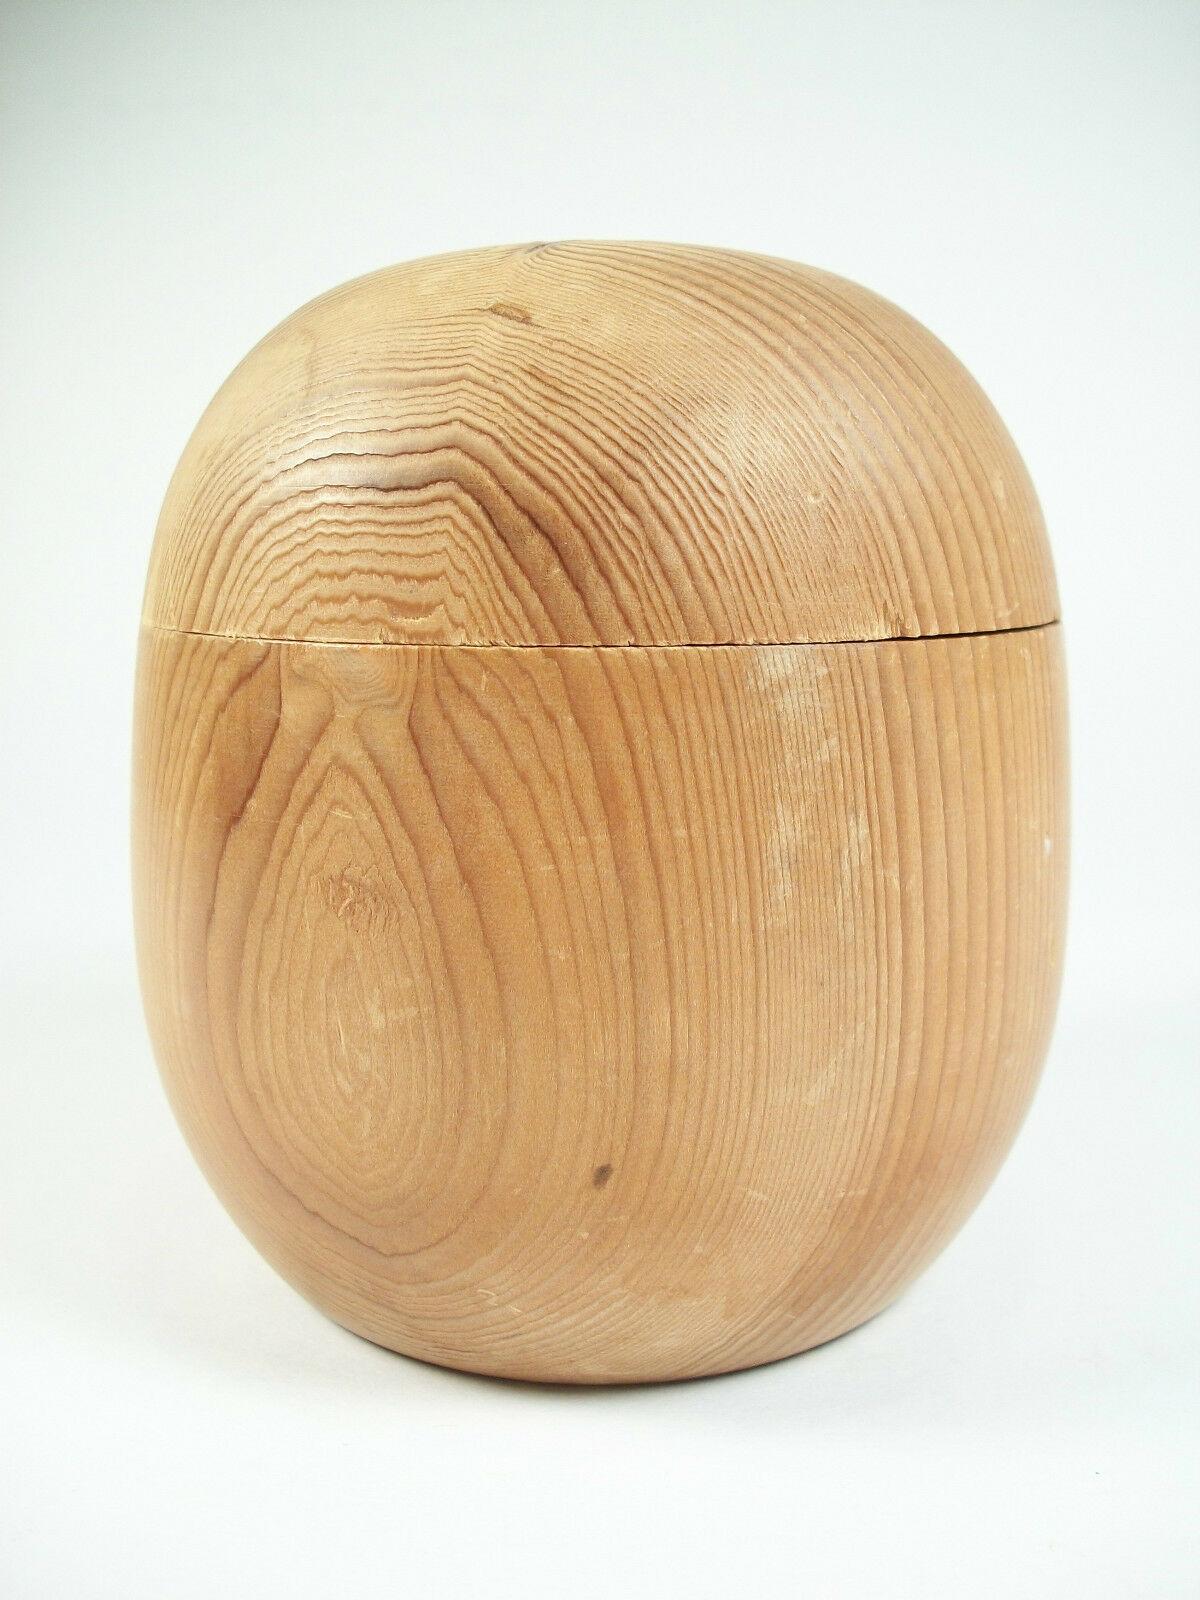 Hand-Crafted Antique Scandinavian Pine Canister, Treen Ware, Early 20th Century For Sale